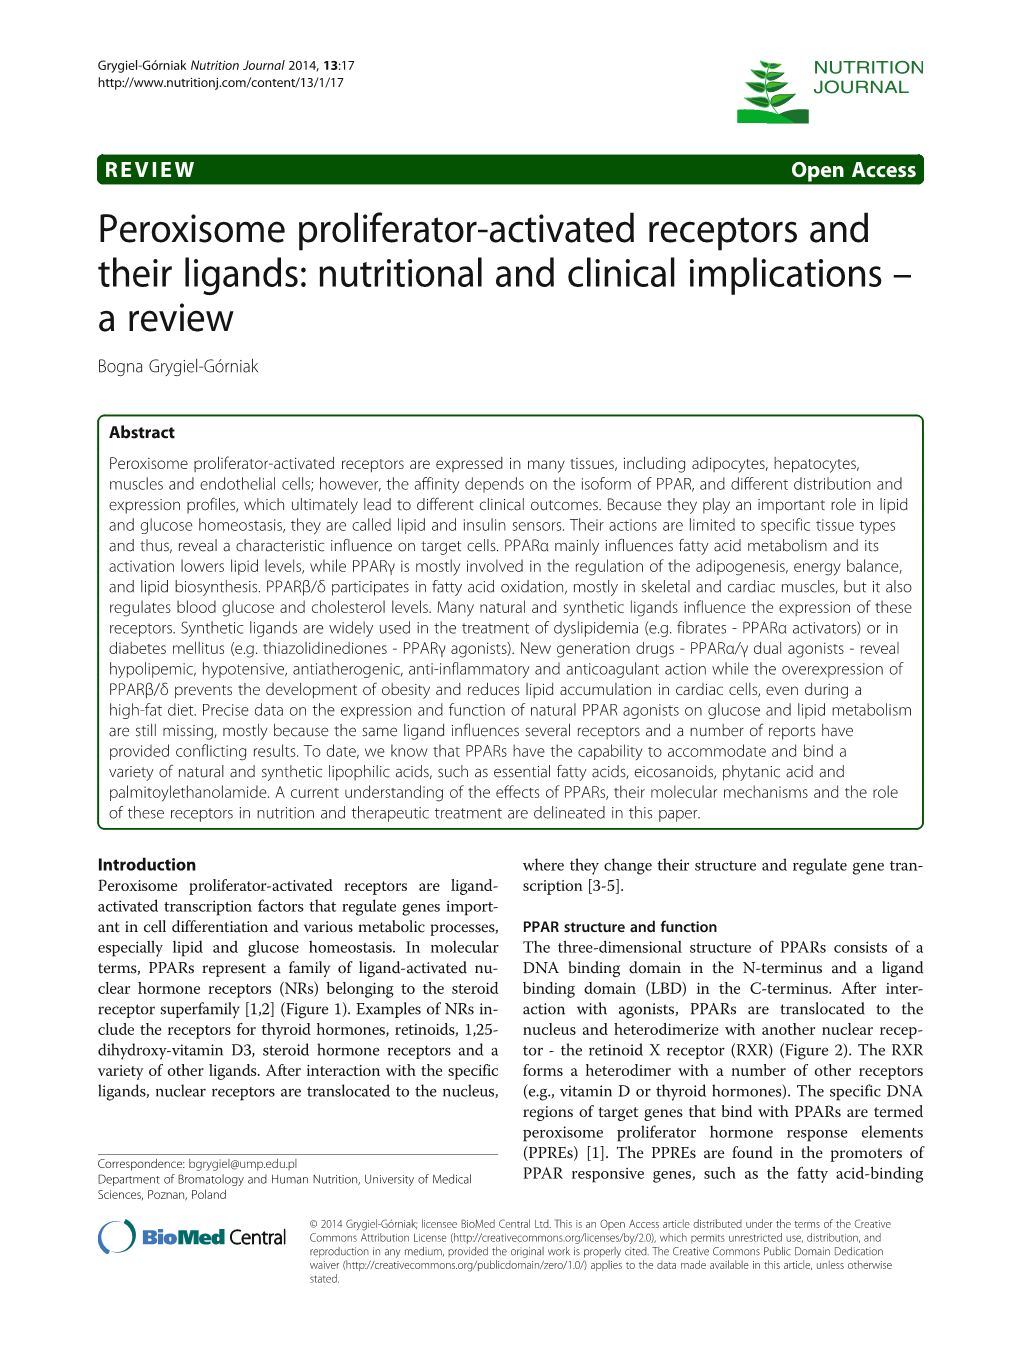 Peroxisome Proliferator-Activated Receptors and Their Ligands: Nutritional and Clinical Implications – Areview Bogna Grygiel-Górniak